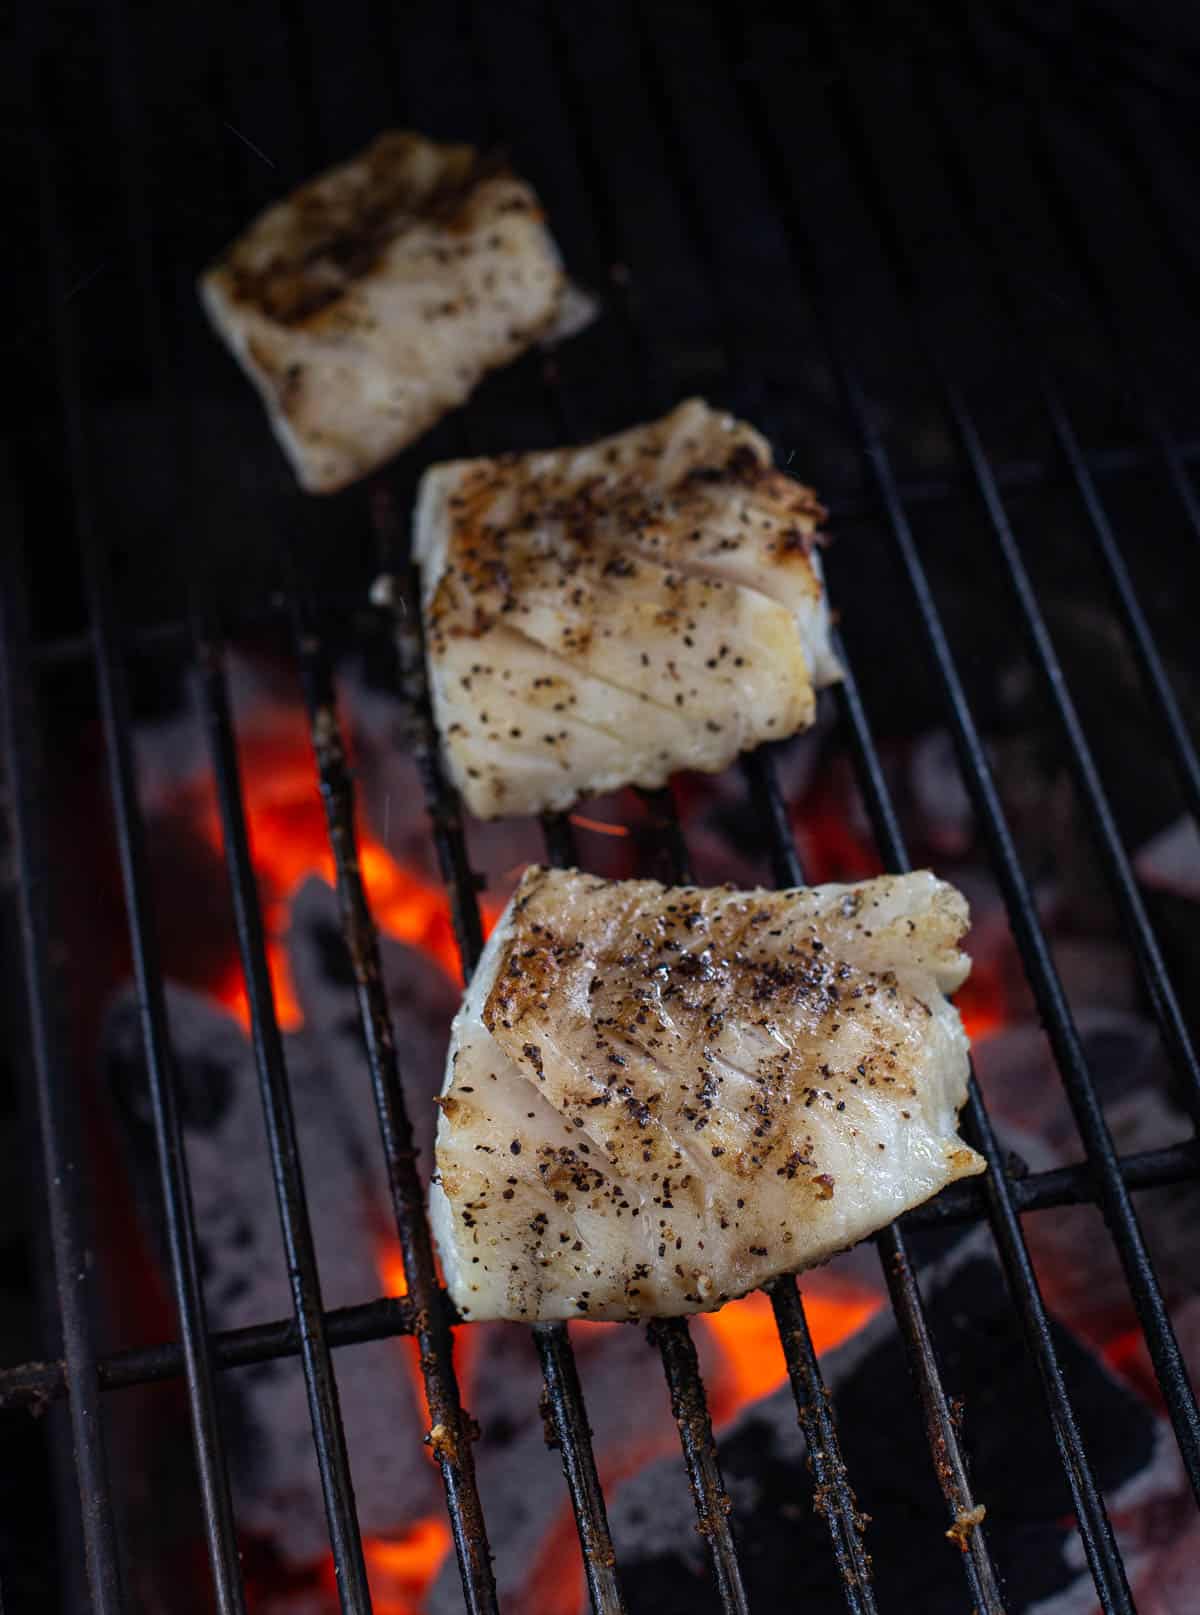 Three Cod Filets cooking on the grill